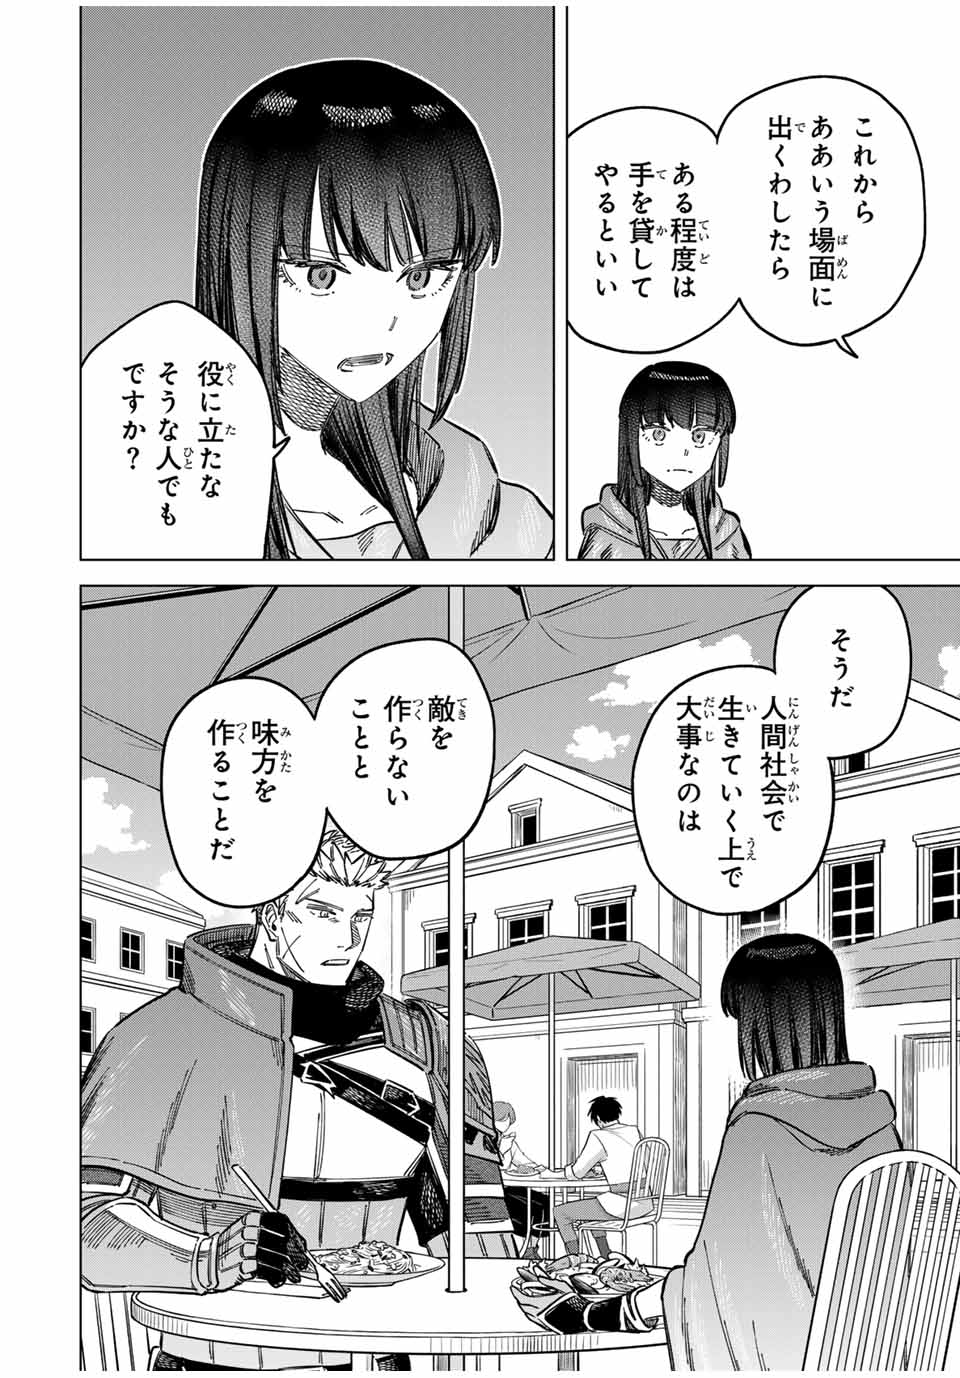 Witch and Mercenary 魔女と傭兵 第6話 - Page 14